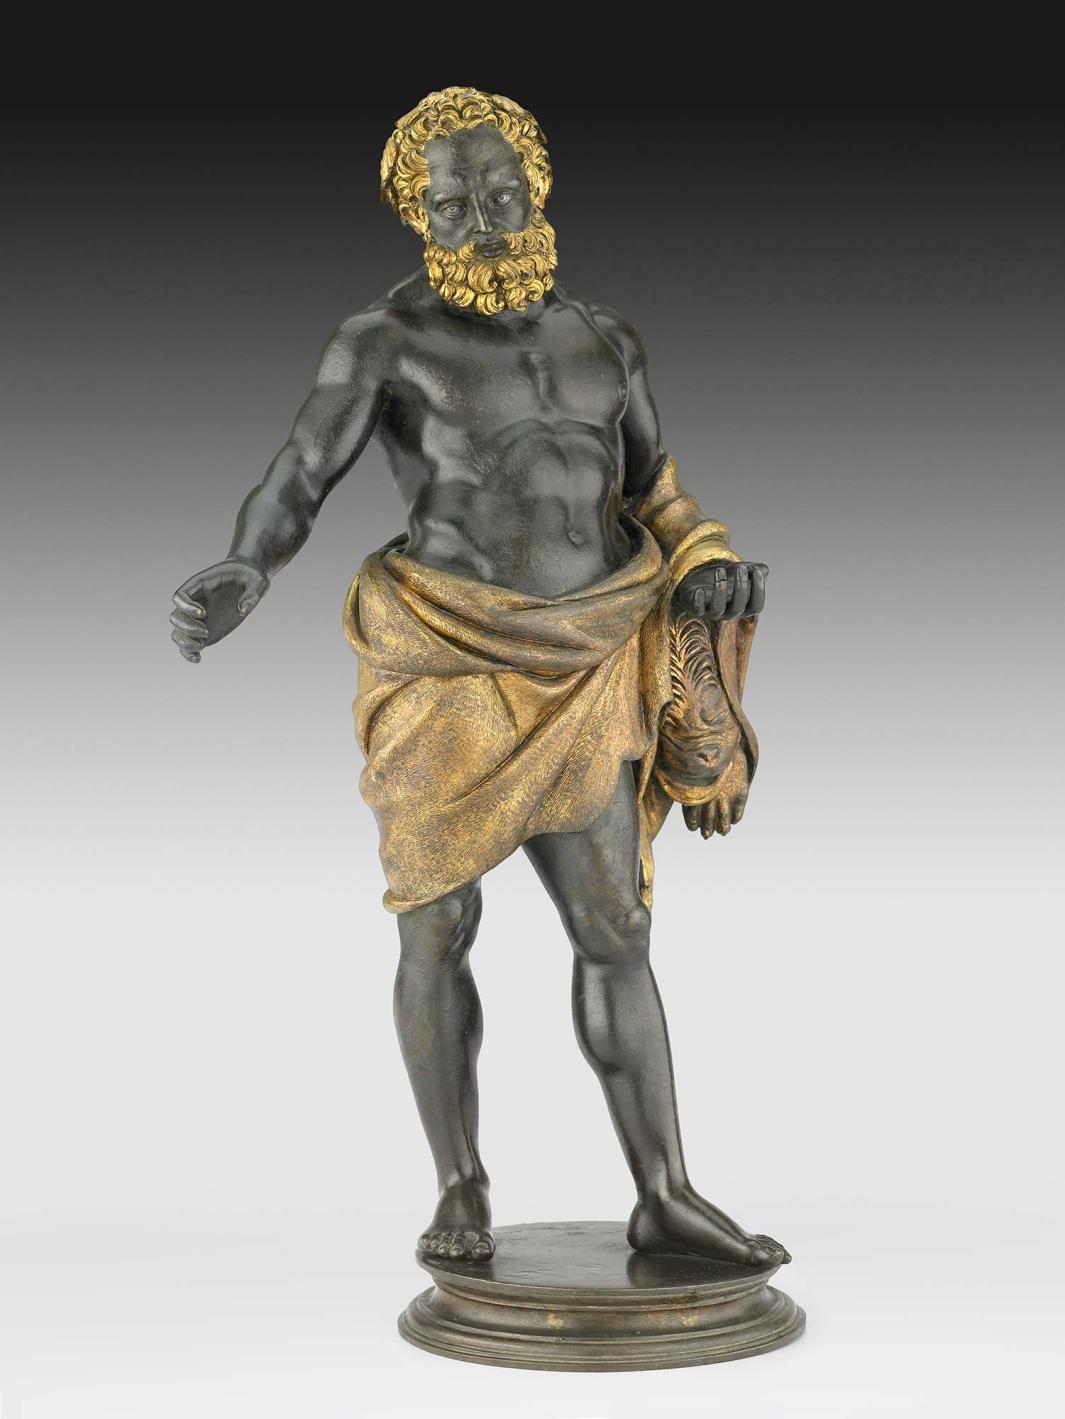 Bronze sculpture depicting Hercules, with partial gilding and silvering